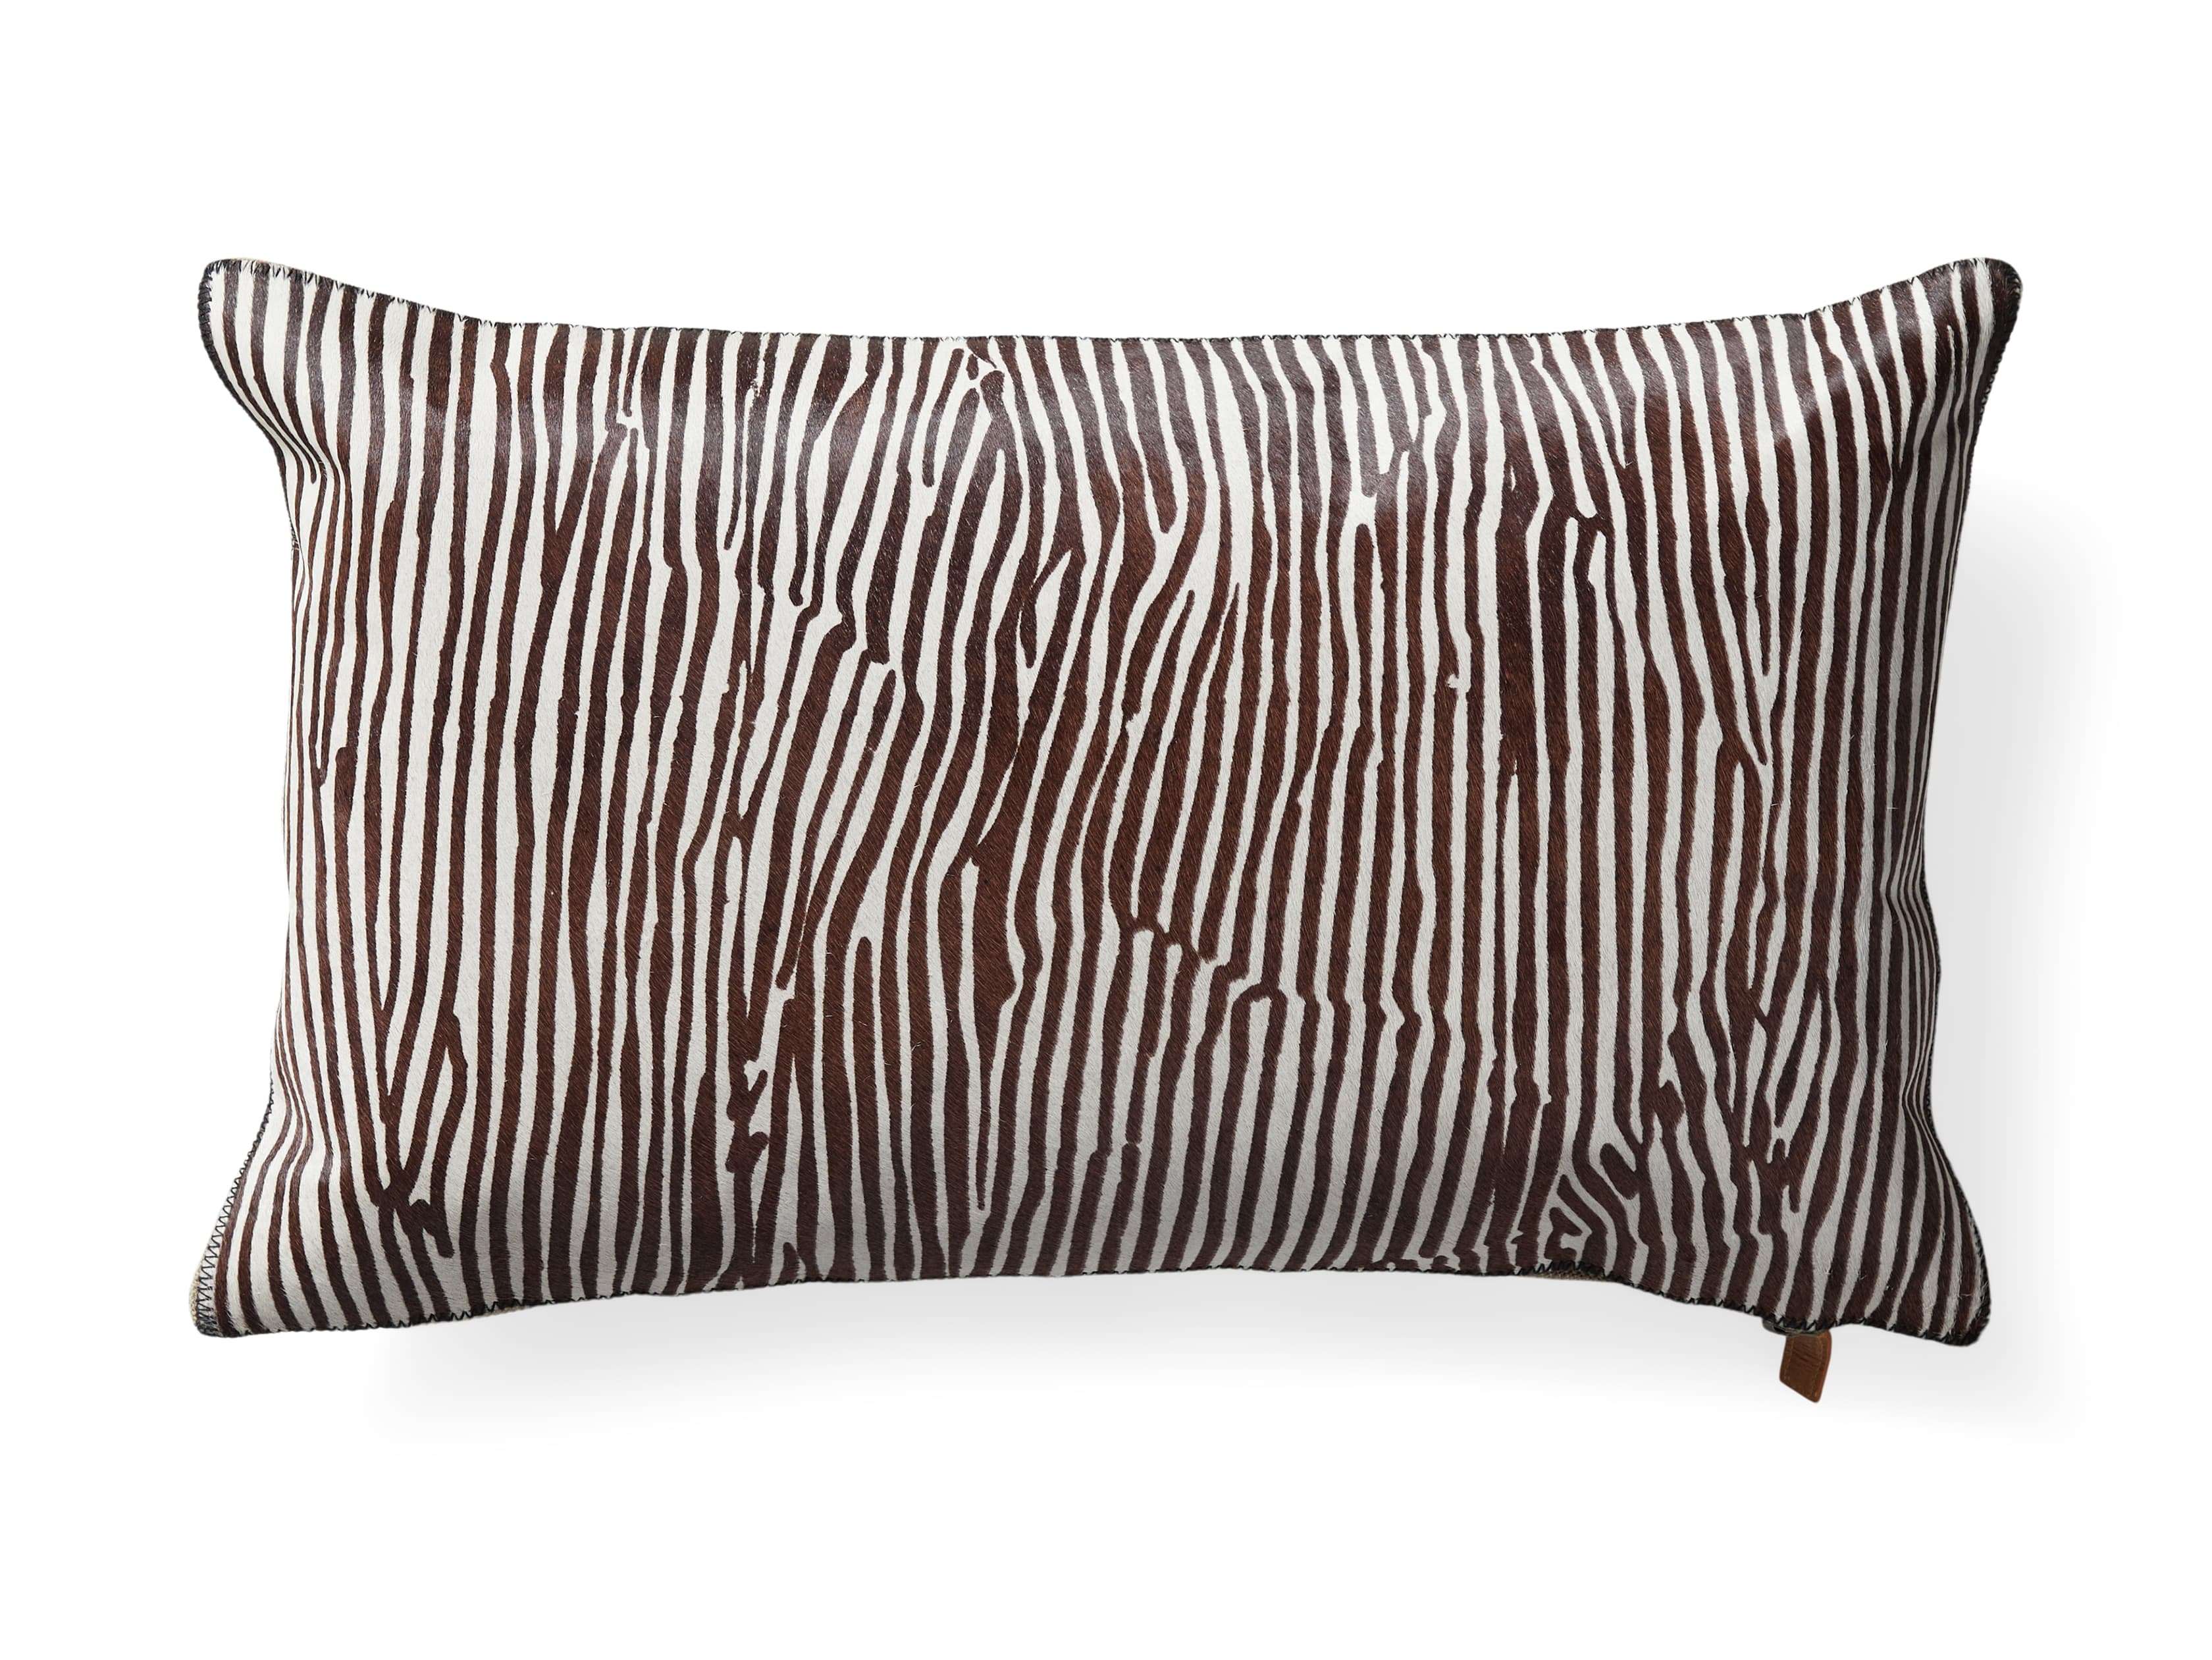 Zebra Leather Bed Pillows - Contemporary - Bedroom